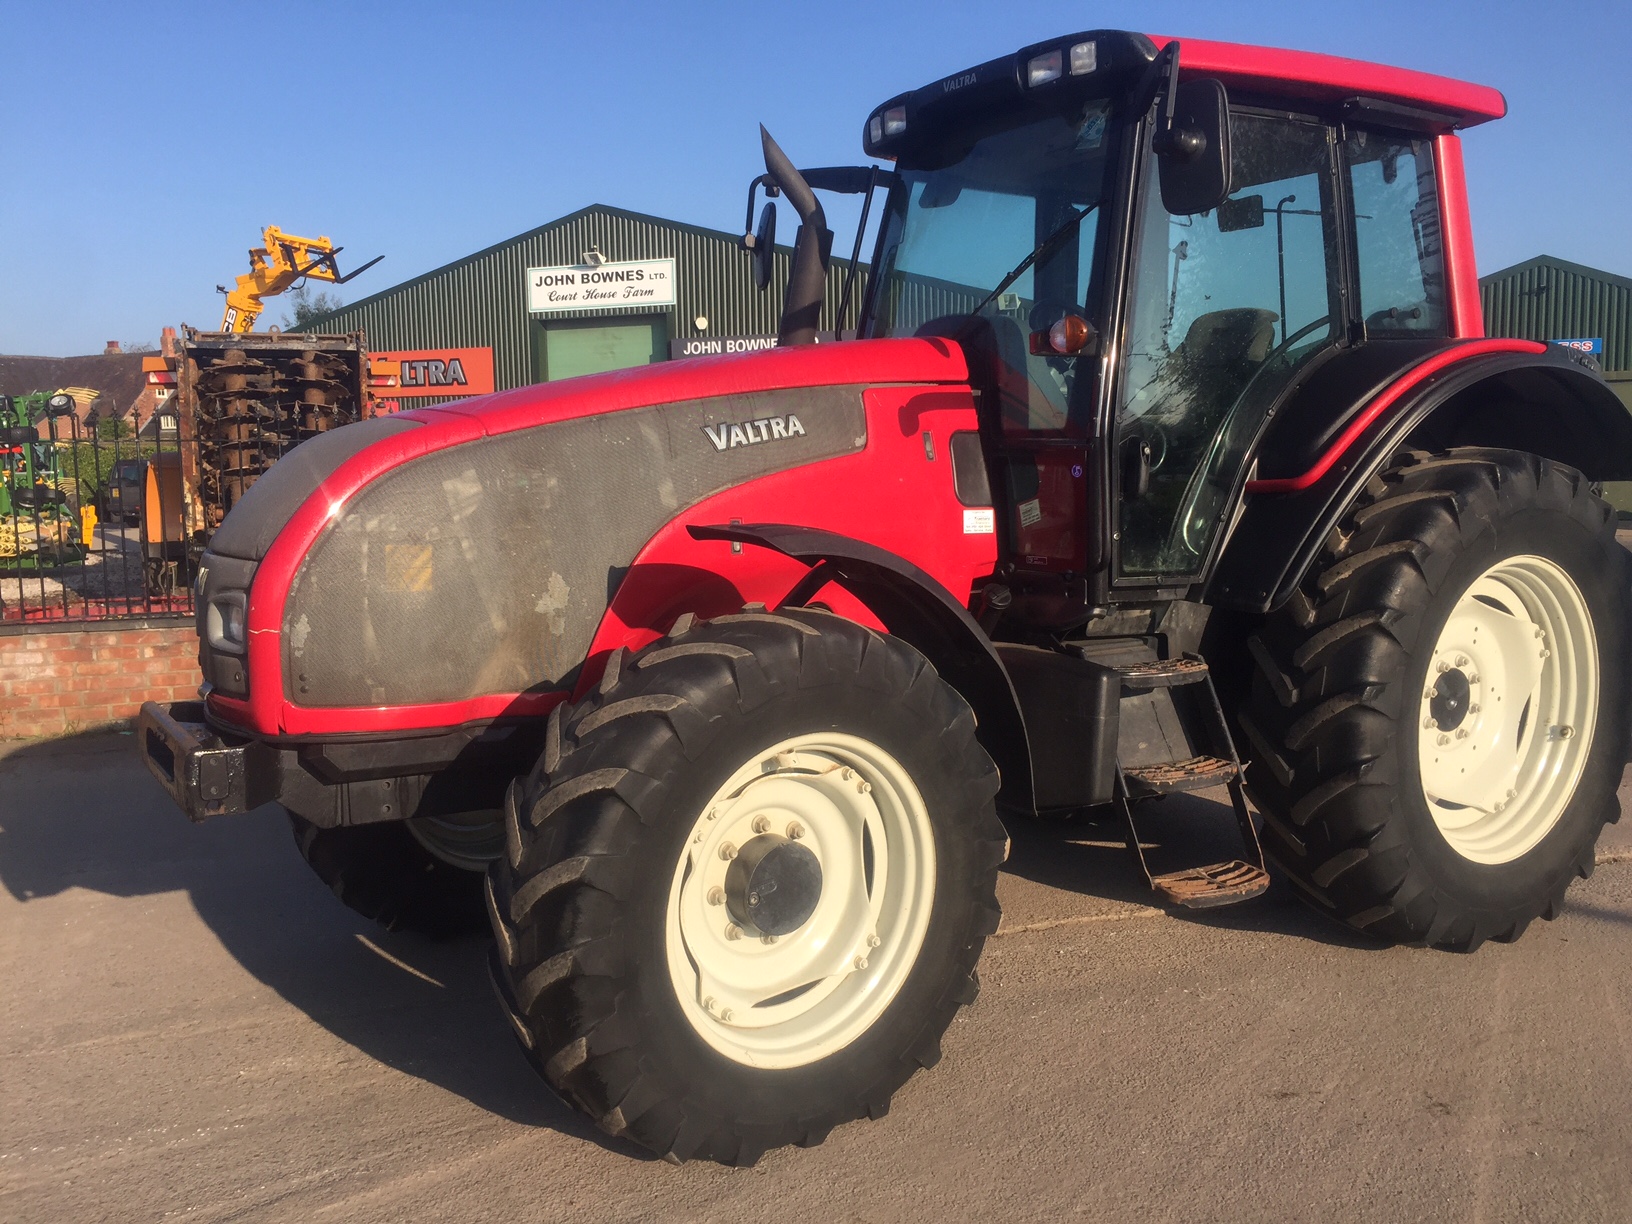 Valtra T120 HiTech - John Bownes | New and used Tractors, New Valtra ...